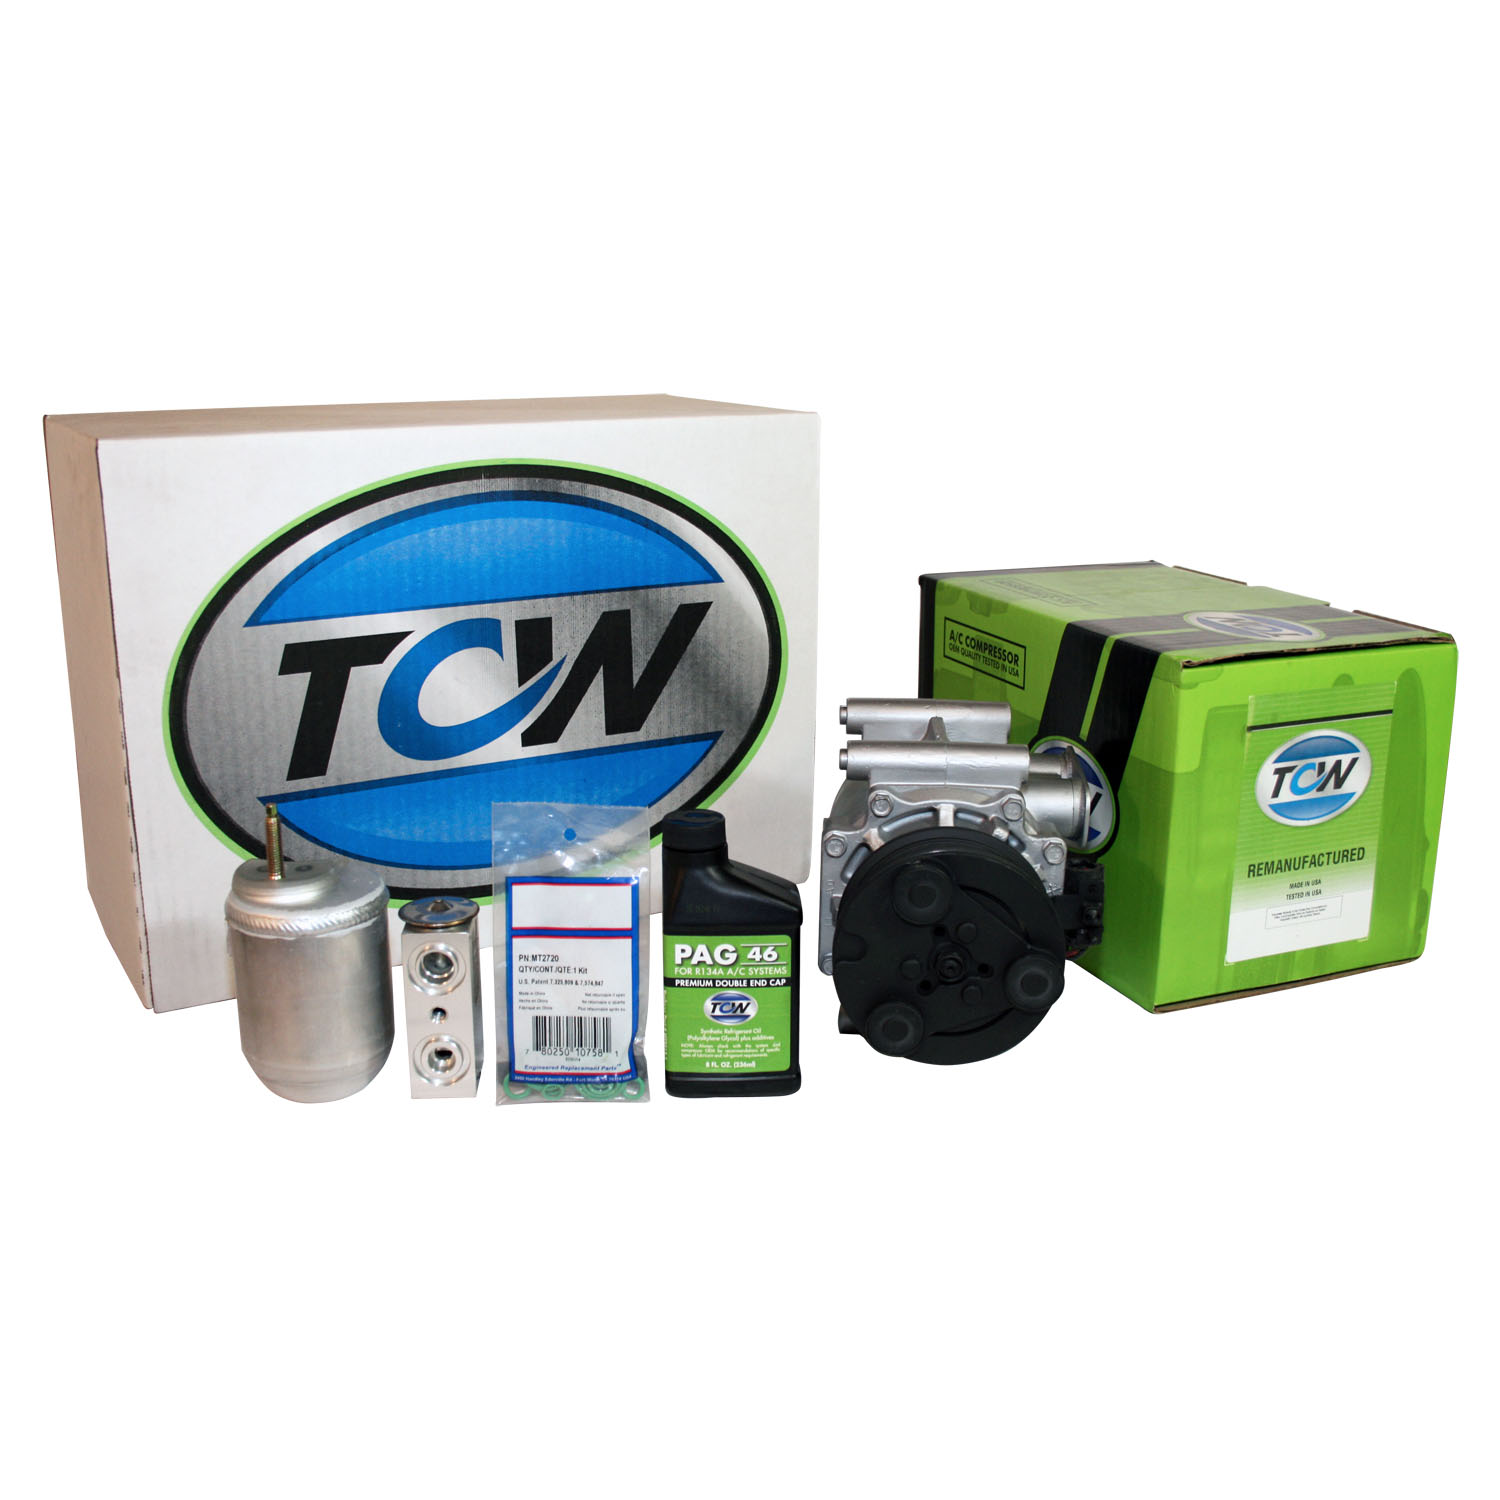 TCW Vehicle A/C Kit K1000252R Remanufactured